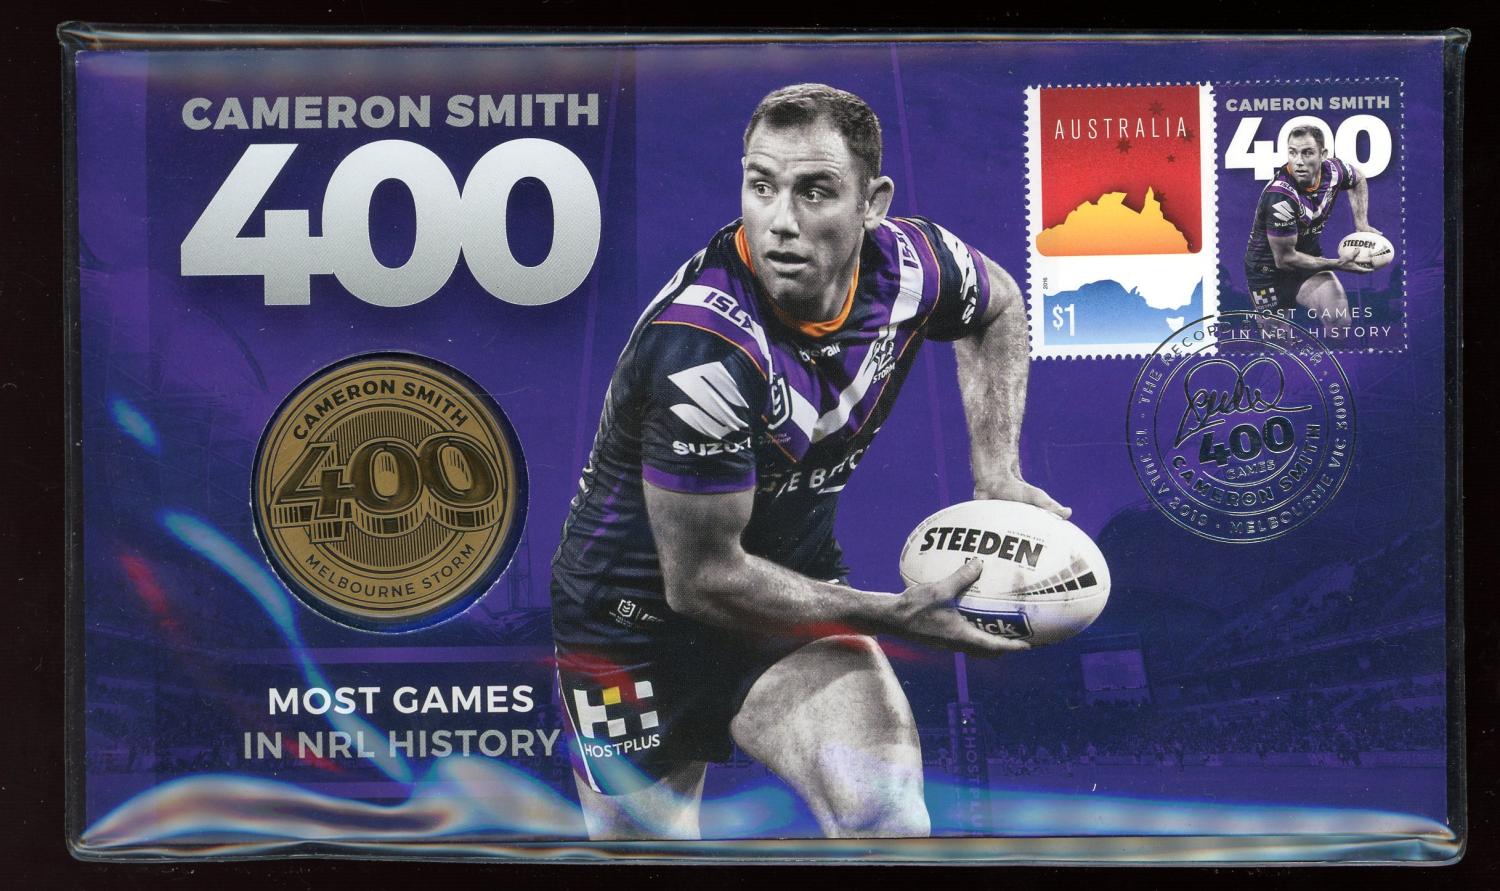 Thumbnail for 2019 Cameron Smith Most Games in NRL History 400 Medallic PNC